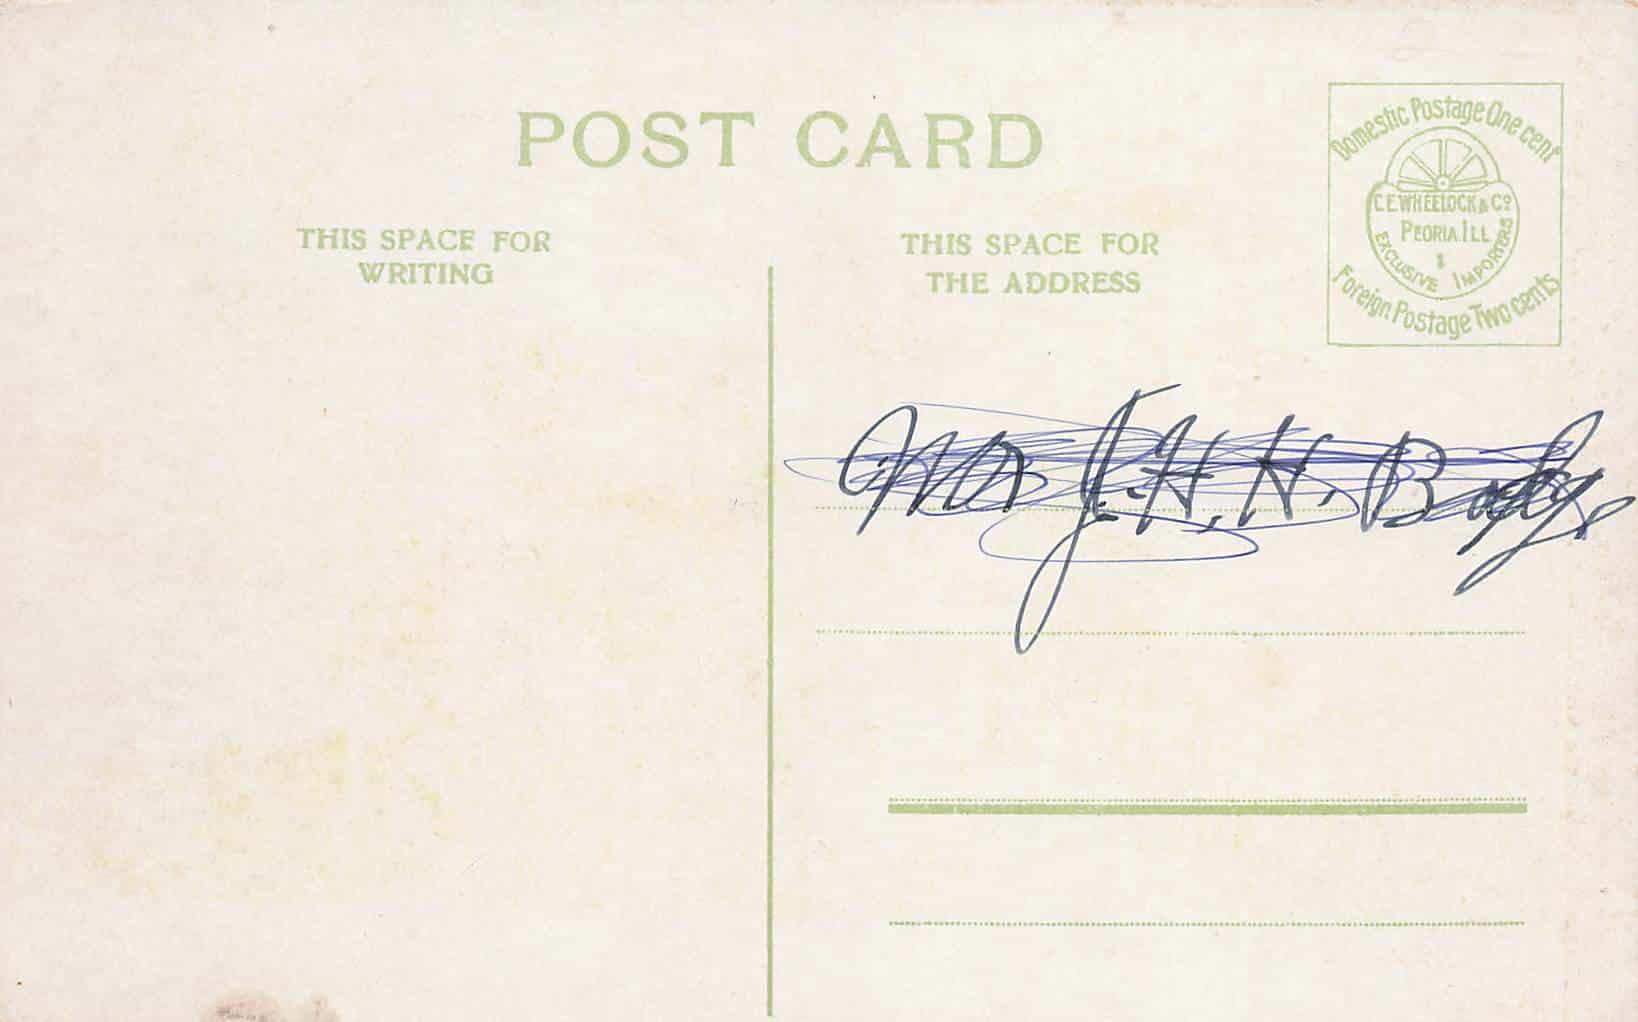 A post card from Guthrie City Hall with a signature on it.